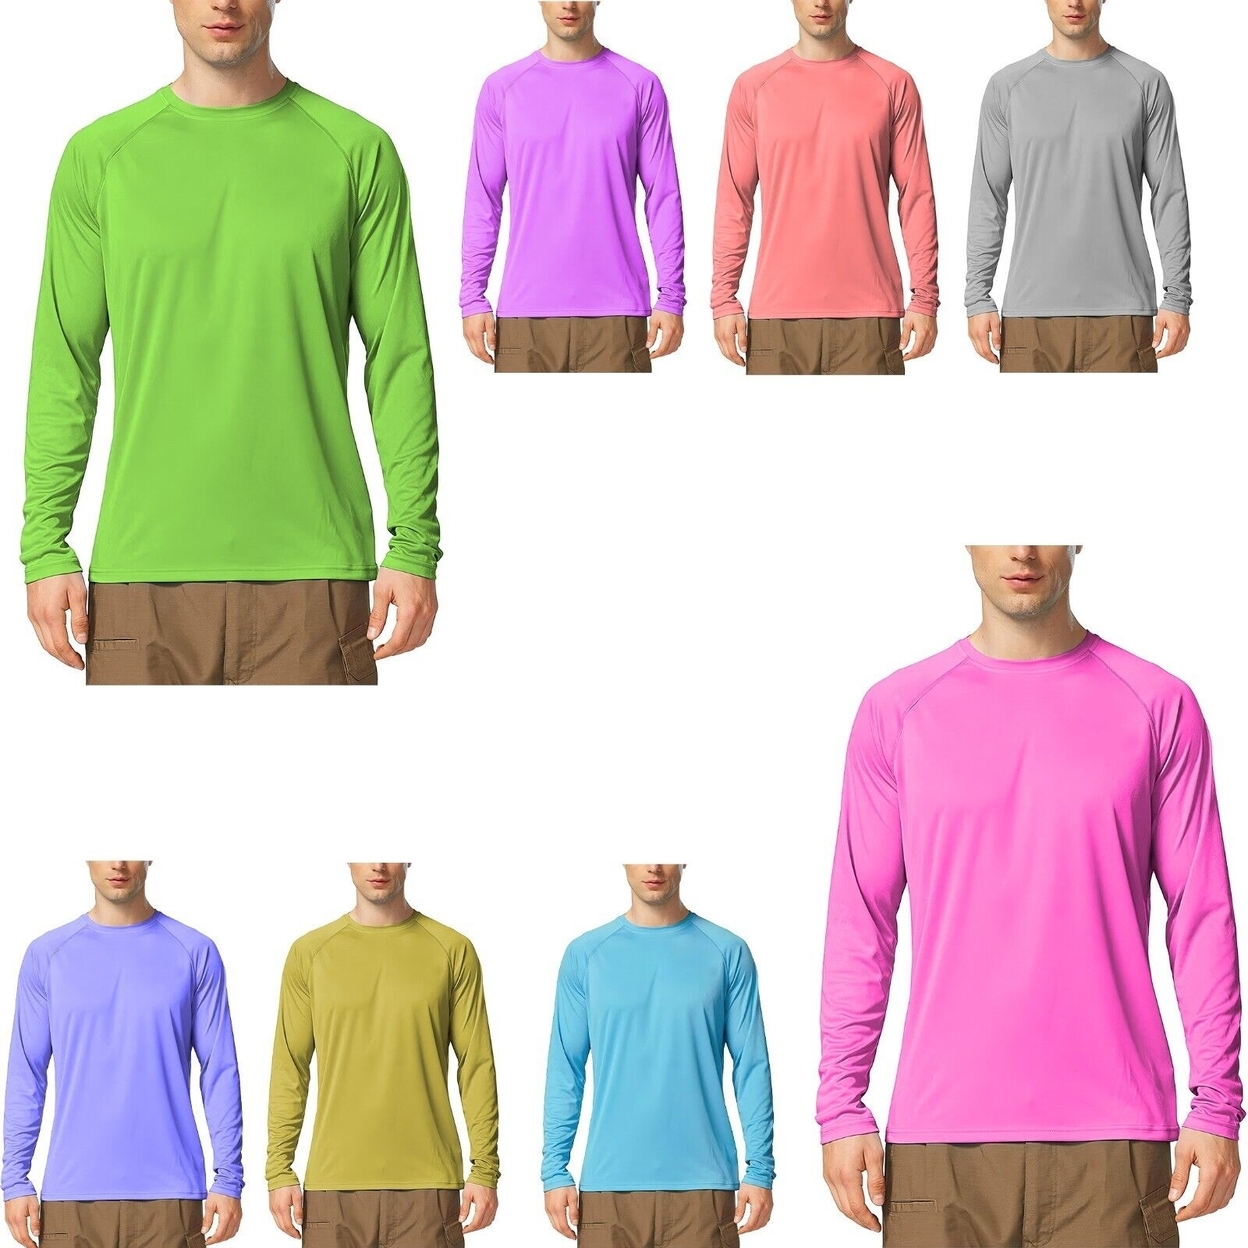 5-Pack: Men's Dri-Fit Moisture Wicking Athletic Cool Performance Slim Fit Long Sleeve T-Shirts - Small